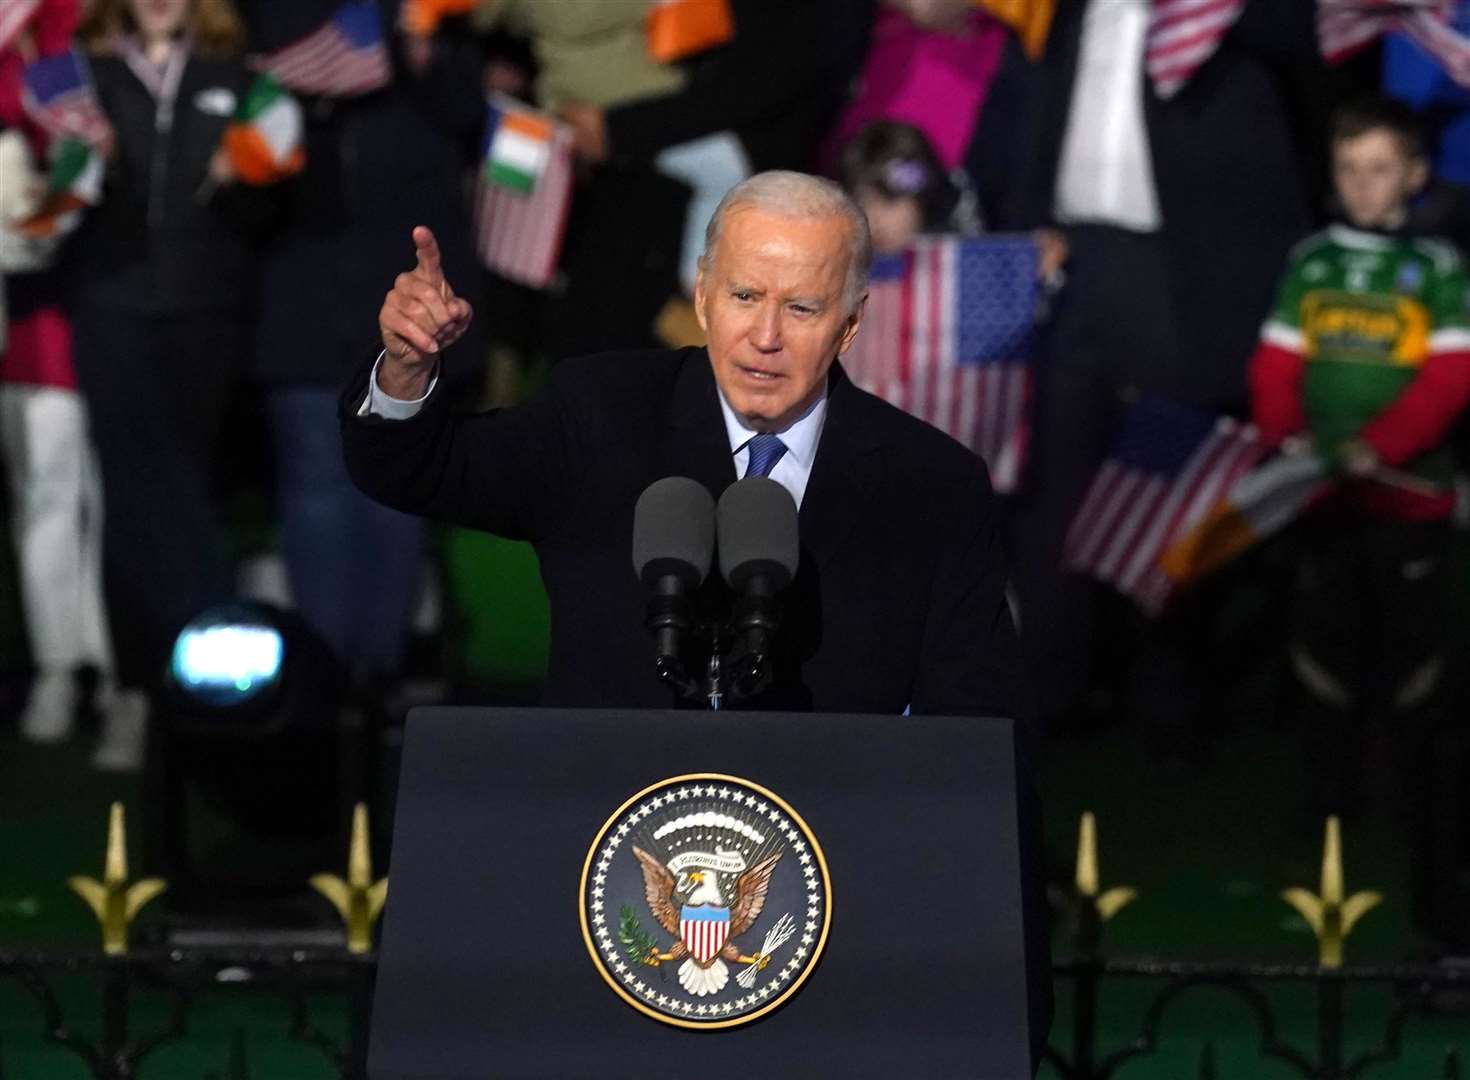 US president Joe Biden delivers a speech at St Muredach’s Cathedral in Ballina (Brian Lawless/PA)